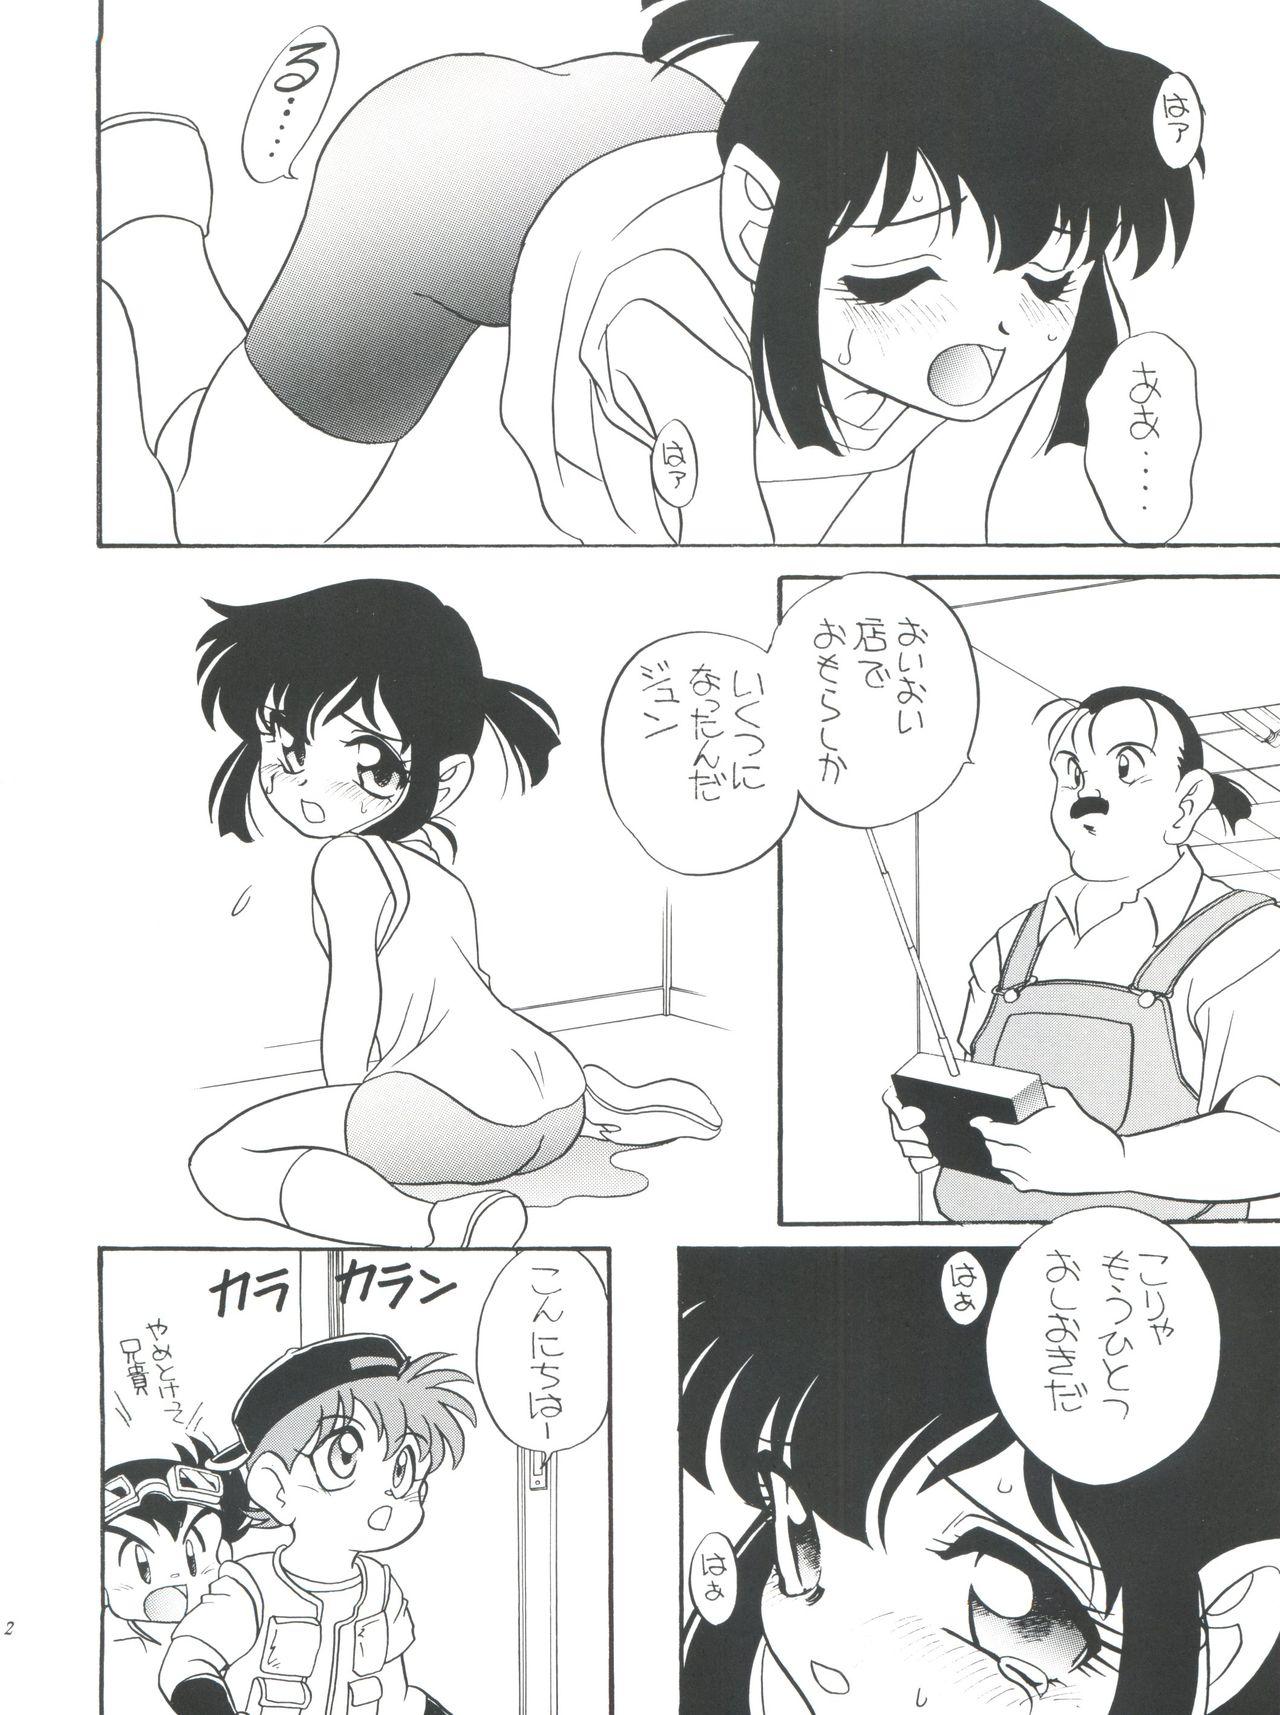 Jerking Off Elfin 14 - Bakusou kyoudai lets and go Rough Porn - Page 11